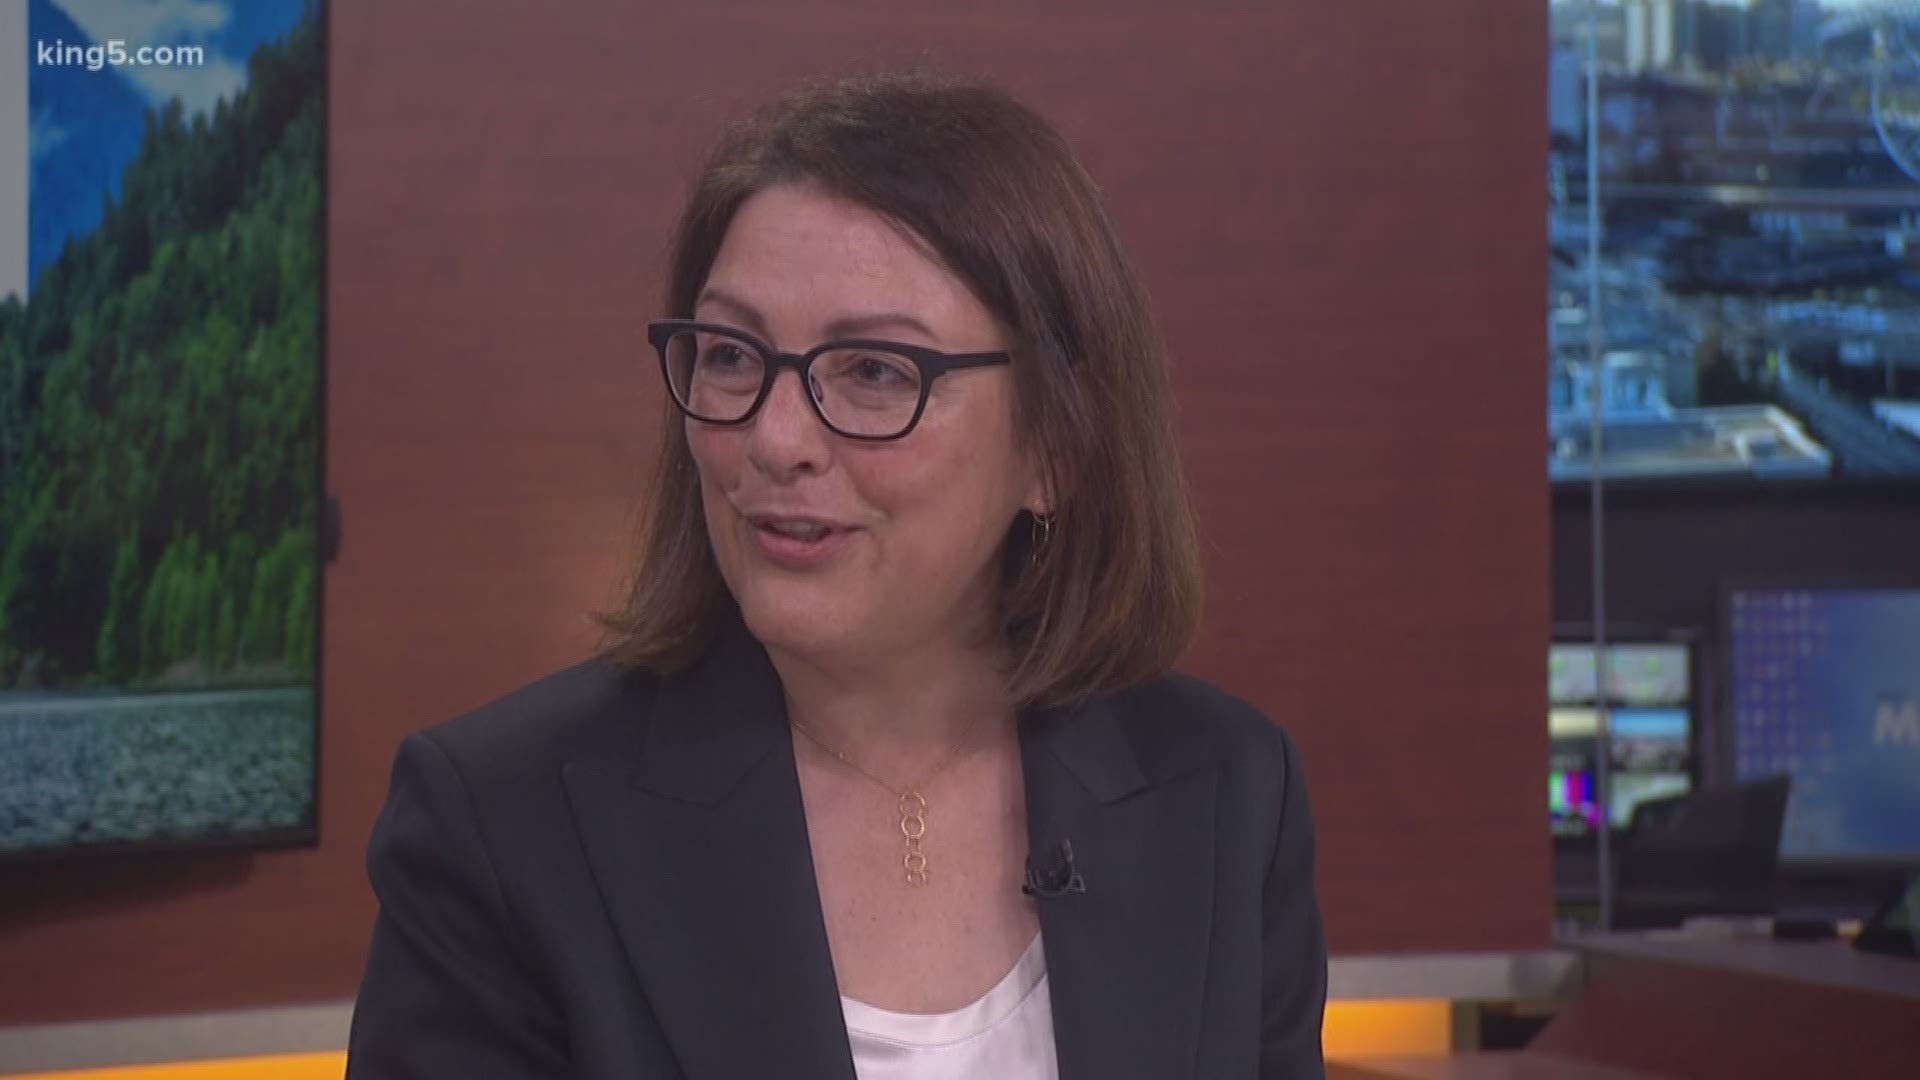 Rep. Susan Delbene says President Trump needs to take responsibility for his 'divisive' language and lead the effort to create a more positive culture to curb mass shootings.